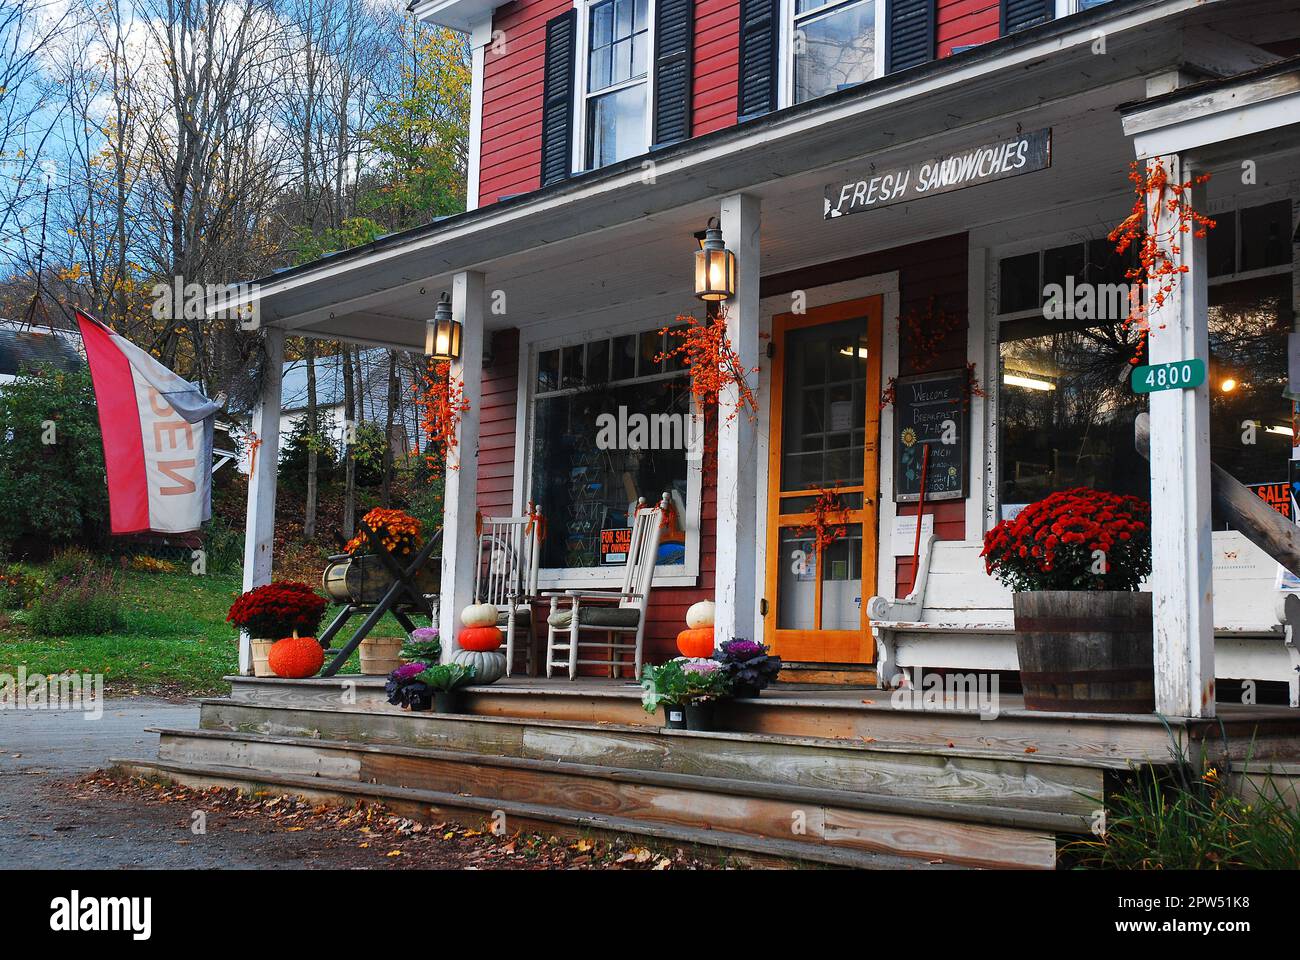 The South Woodstock General Store in Vermont is decorated with mums flowers and pumpkins on an autumn day in New England Stock Photo